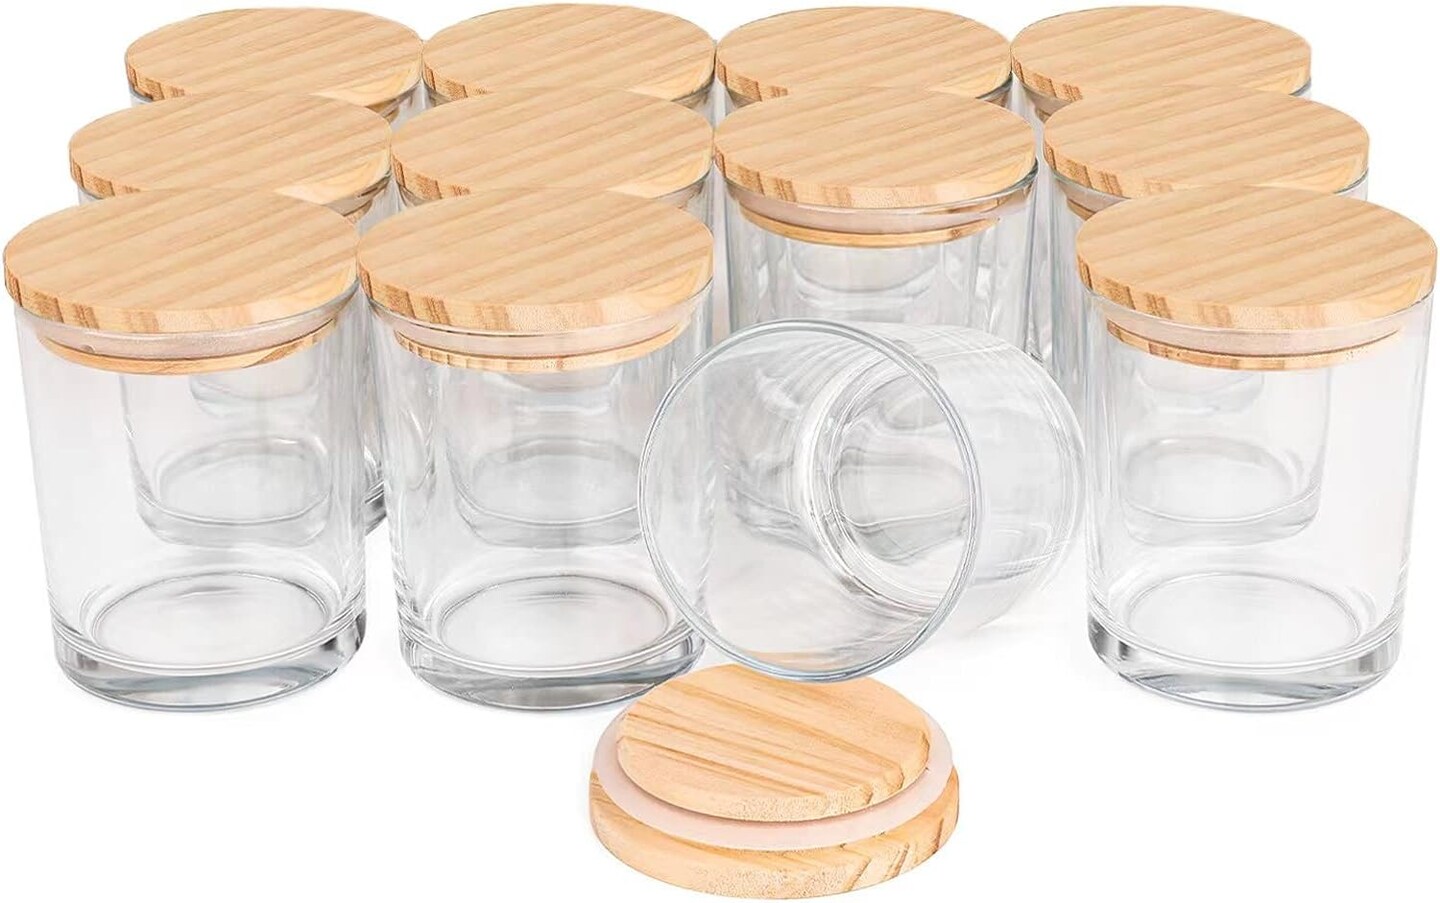 Thick Candle Jars for Making Candles 12 Pcs, 7 OZ Clear Empty Jars with Wood Lids for Spice Jars, Sample Container - Dishwasher Safe